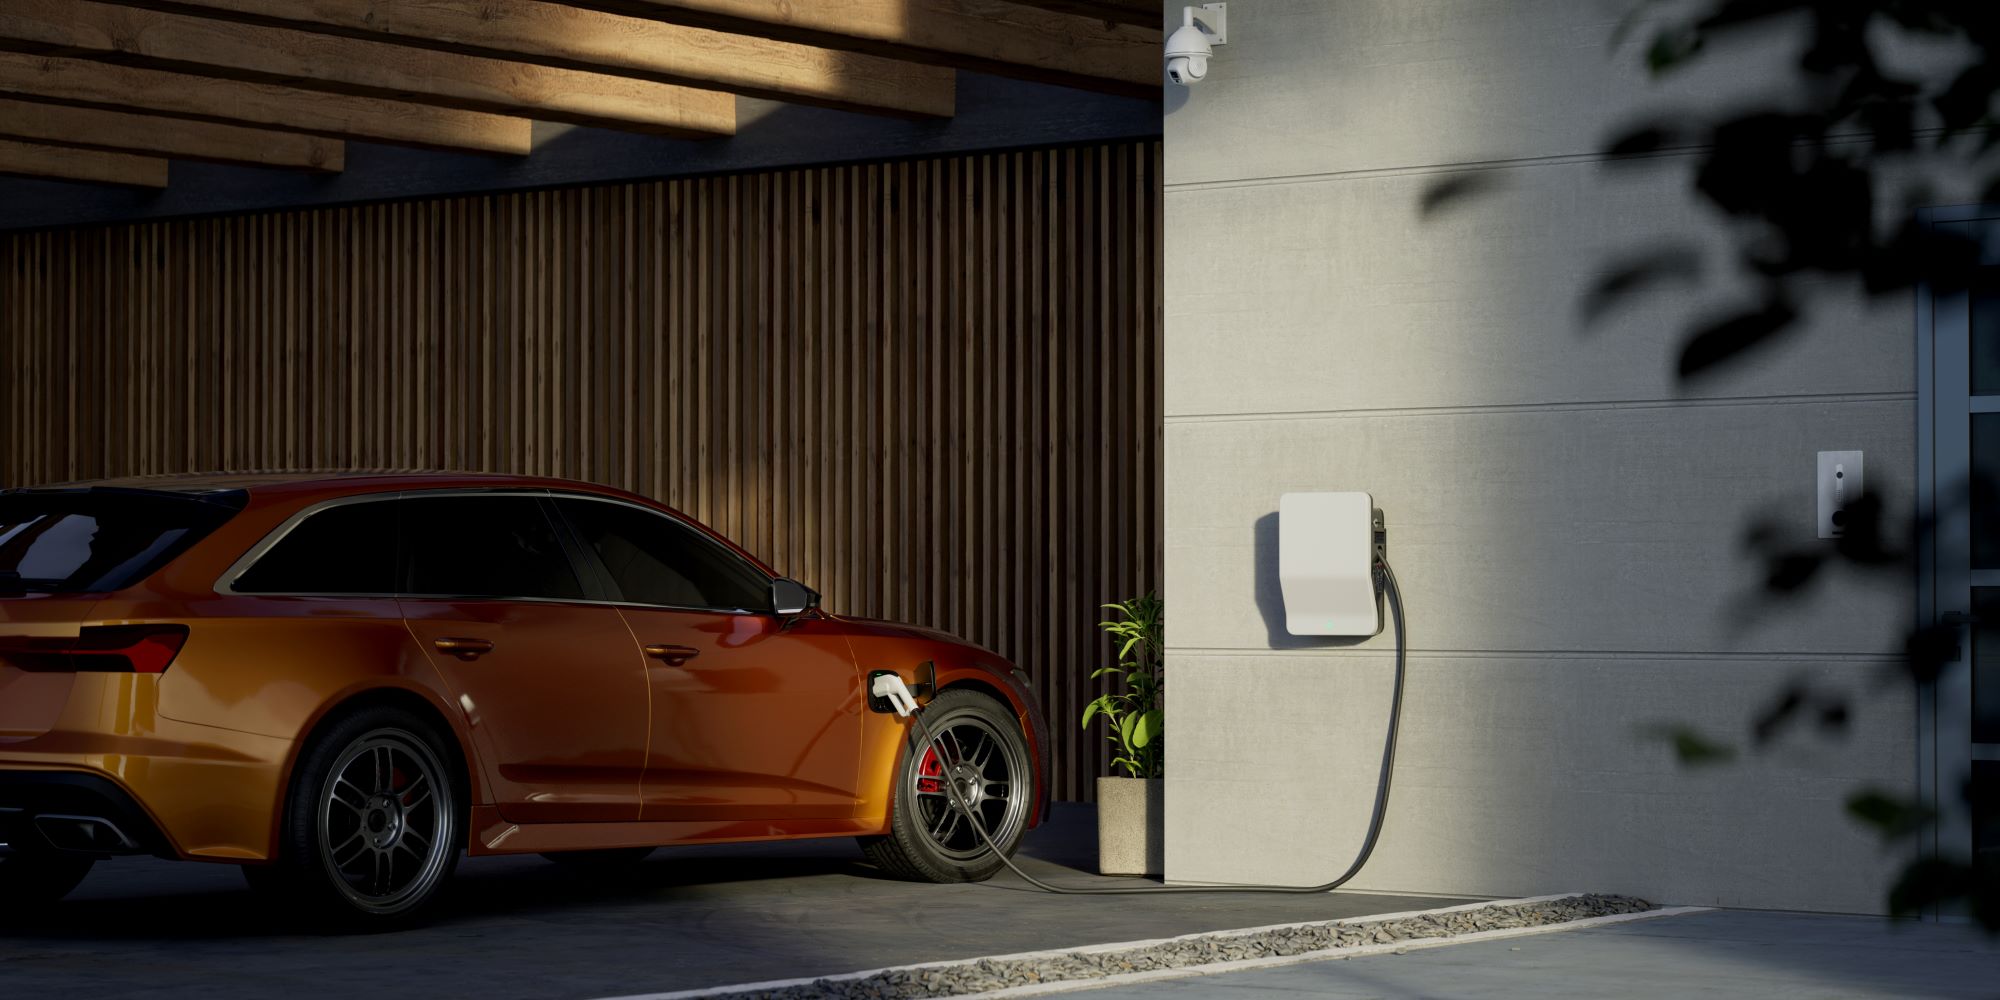 How To Install An Electric Vehicle Charger On Your Property